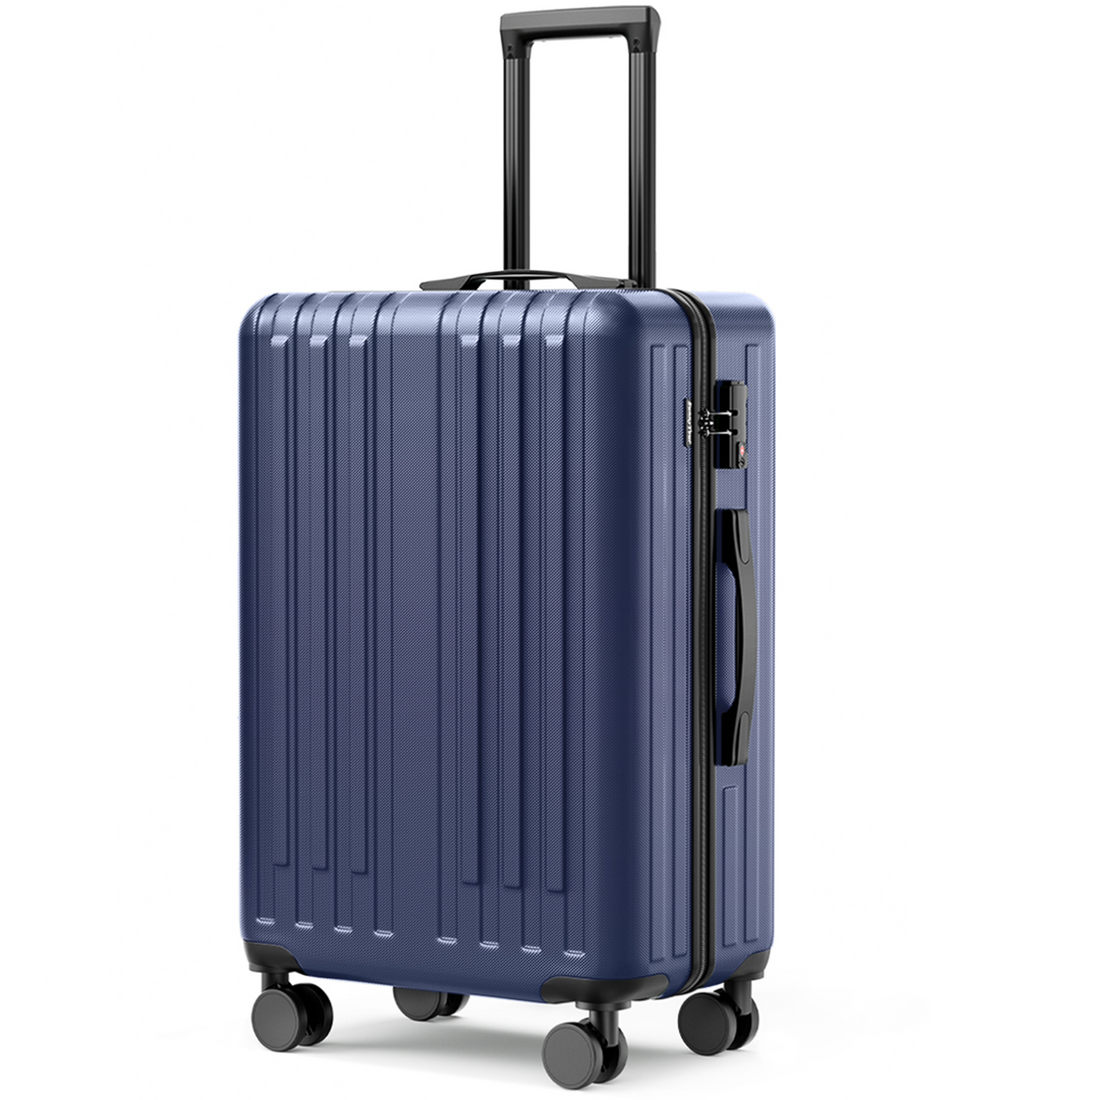 28 Inch Checked Luggage With 360 Spinner Wheels -